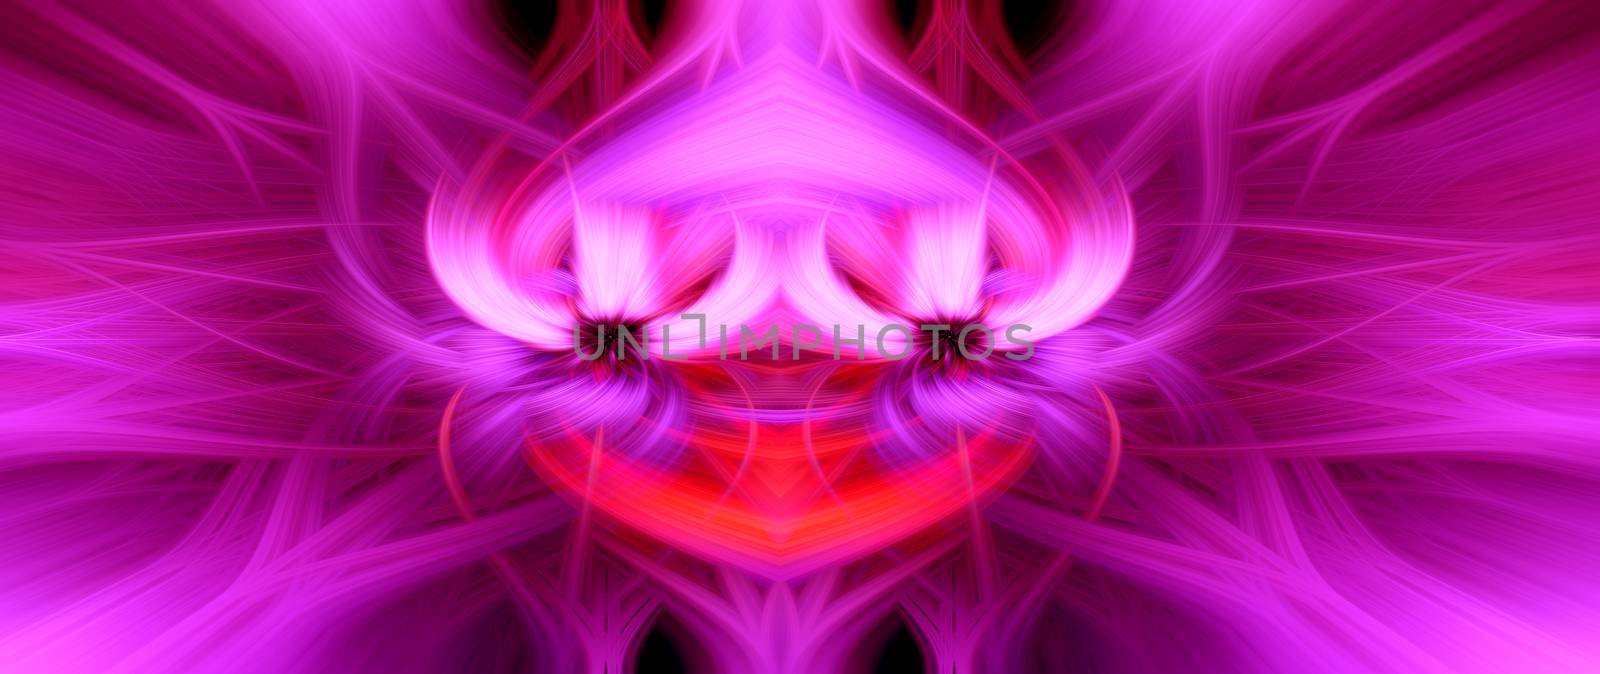 Beautiful abstract intertwined 3d fibers forming a shape of sparkle, flame, flower, interlinked hearts. Pink, purple, maroon and red colors. Illustration. Banner and panorama size. by DamantisZ